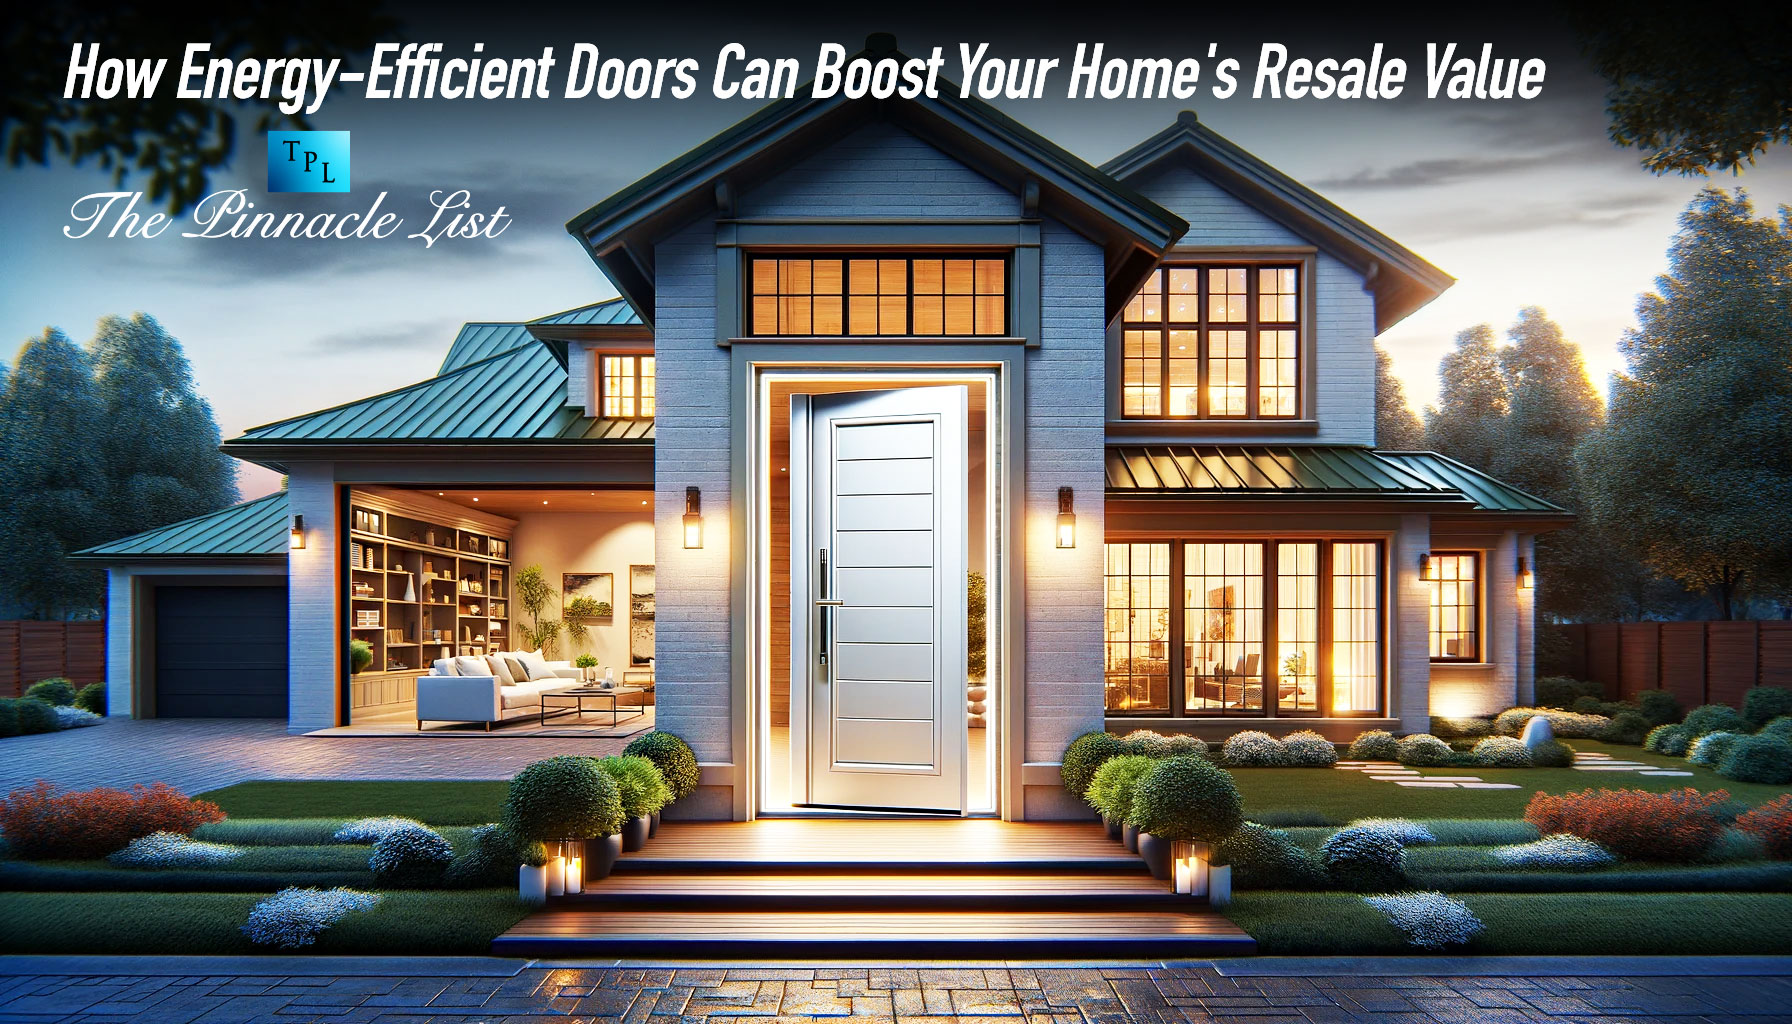 How Energy-Efficient Doors Can Boost Your Home's Resale Value